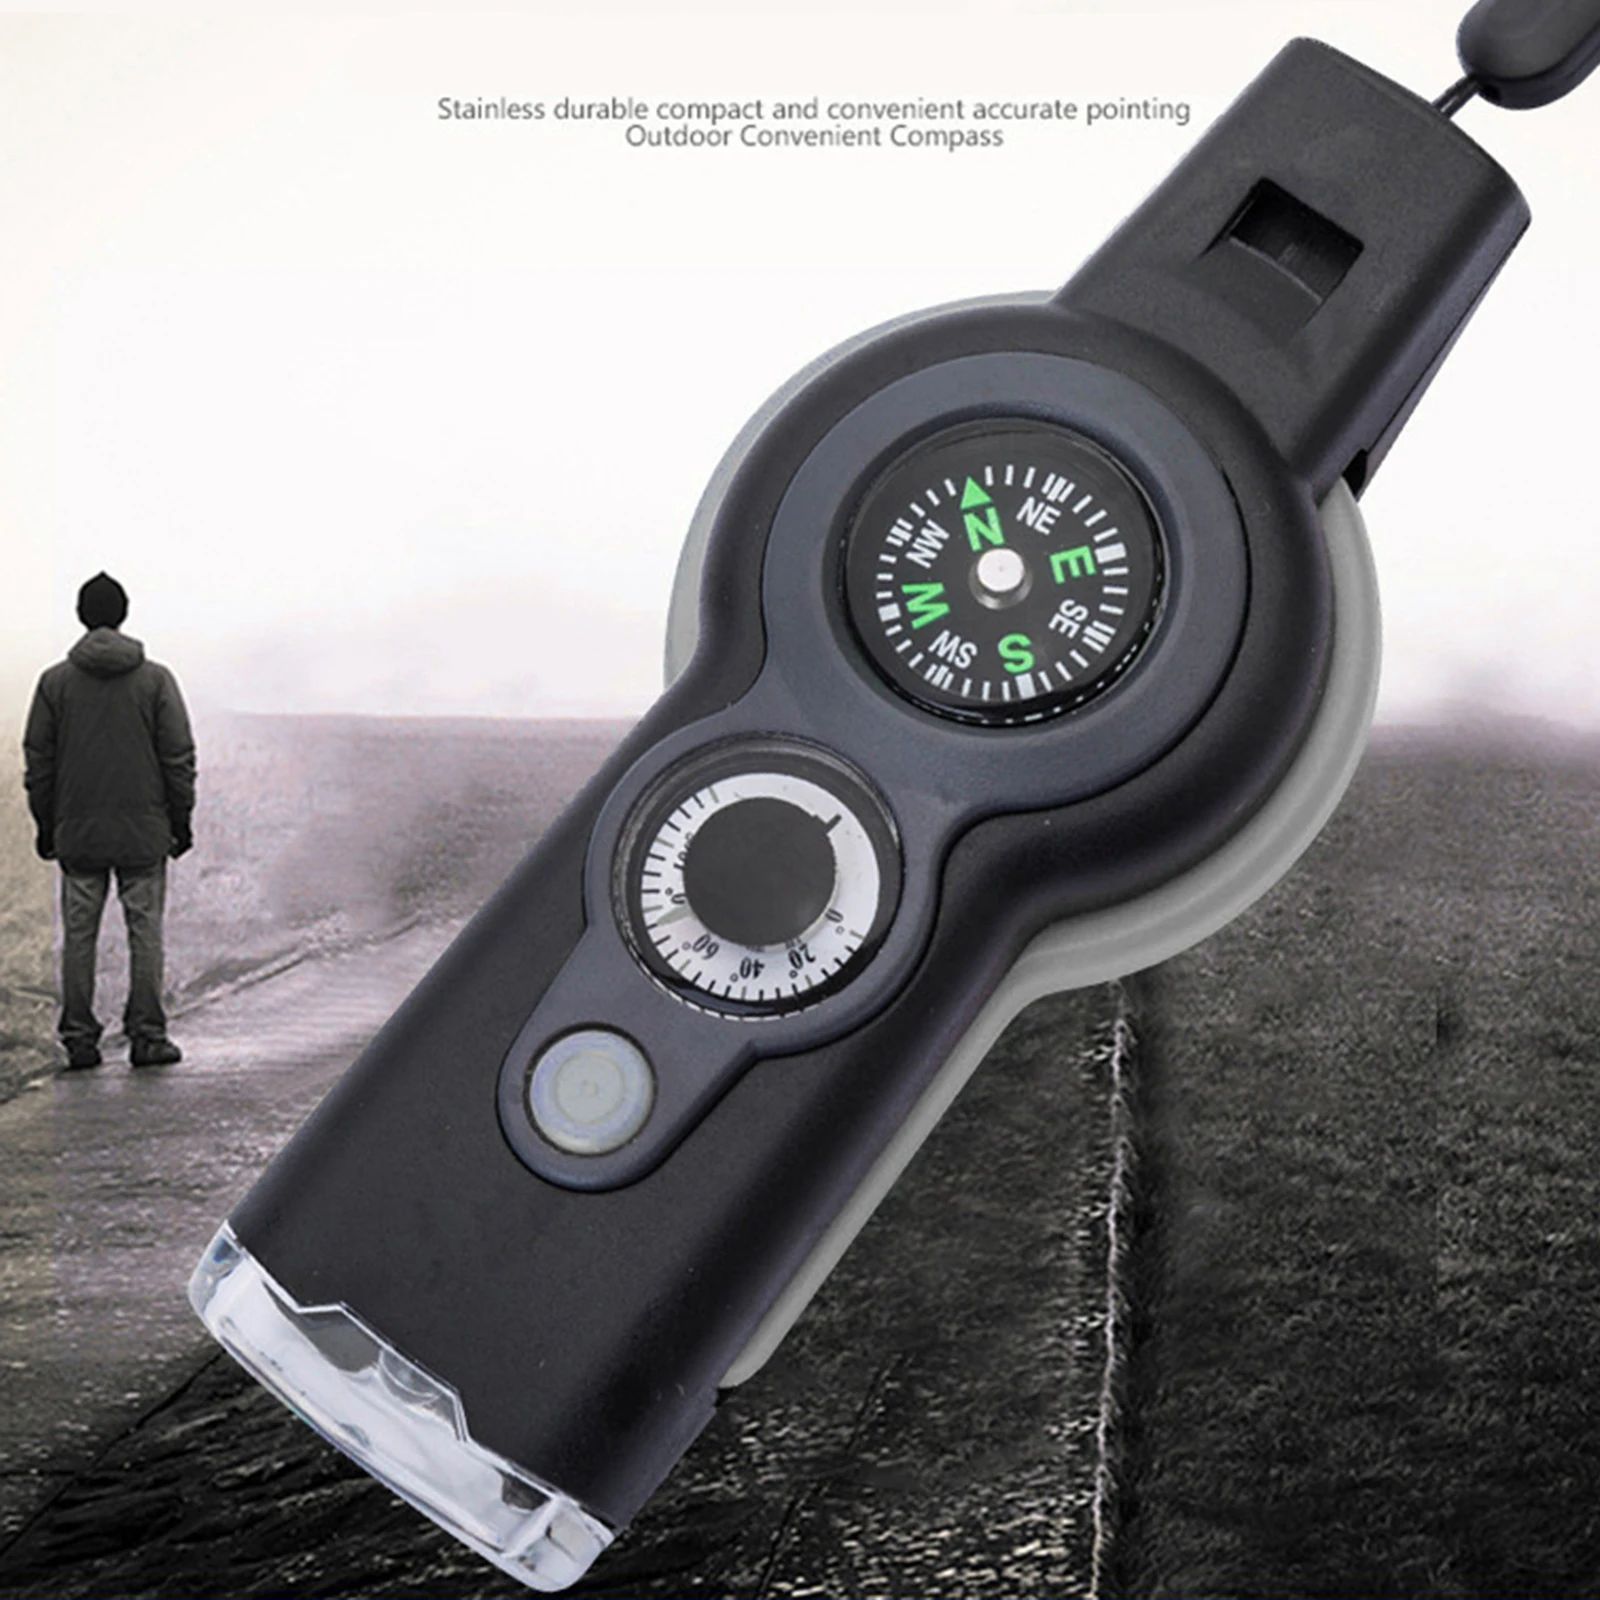 

7 in 1 LED Emergency Survival Camping Hiking Whistle Compass Thermometer Multifunction Magnifier Flashlight Outdoor Tools